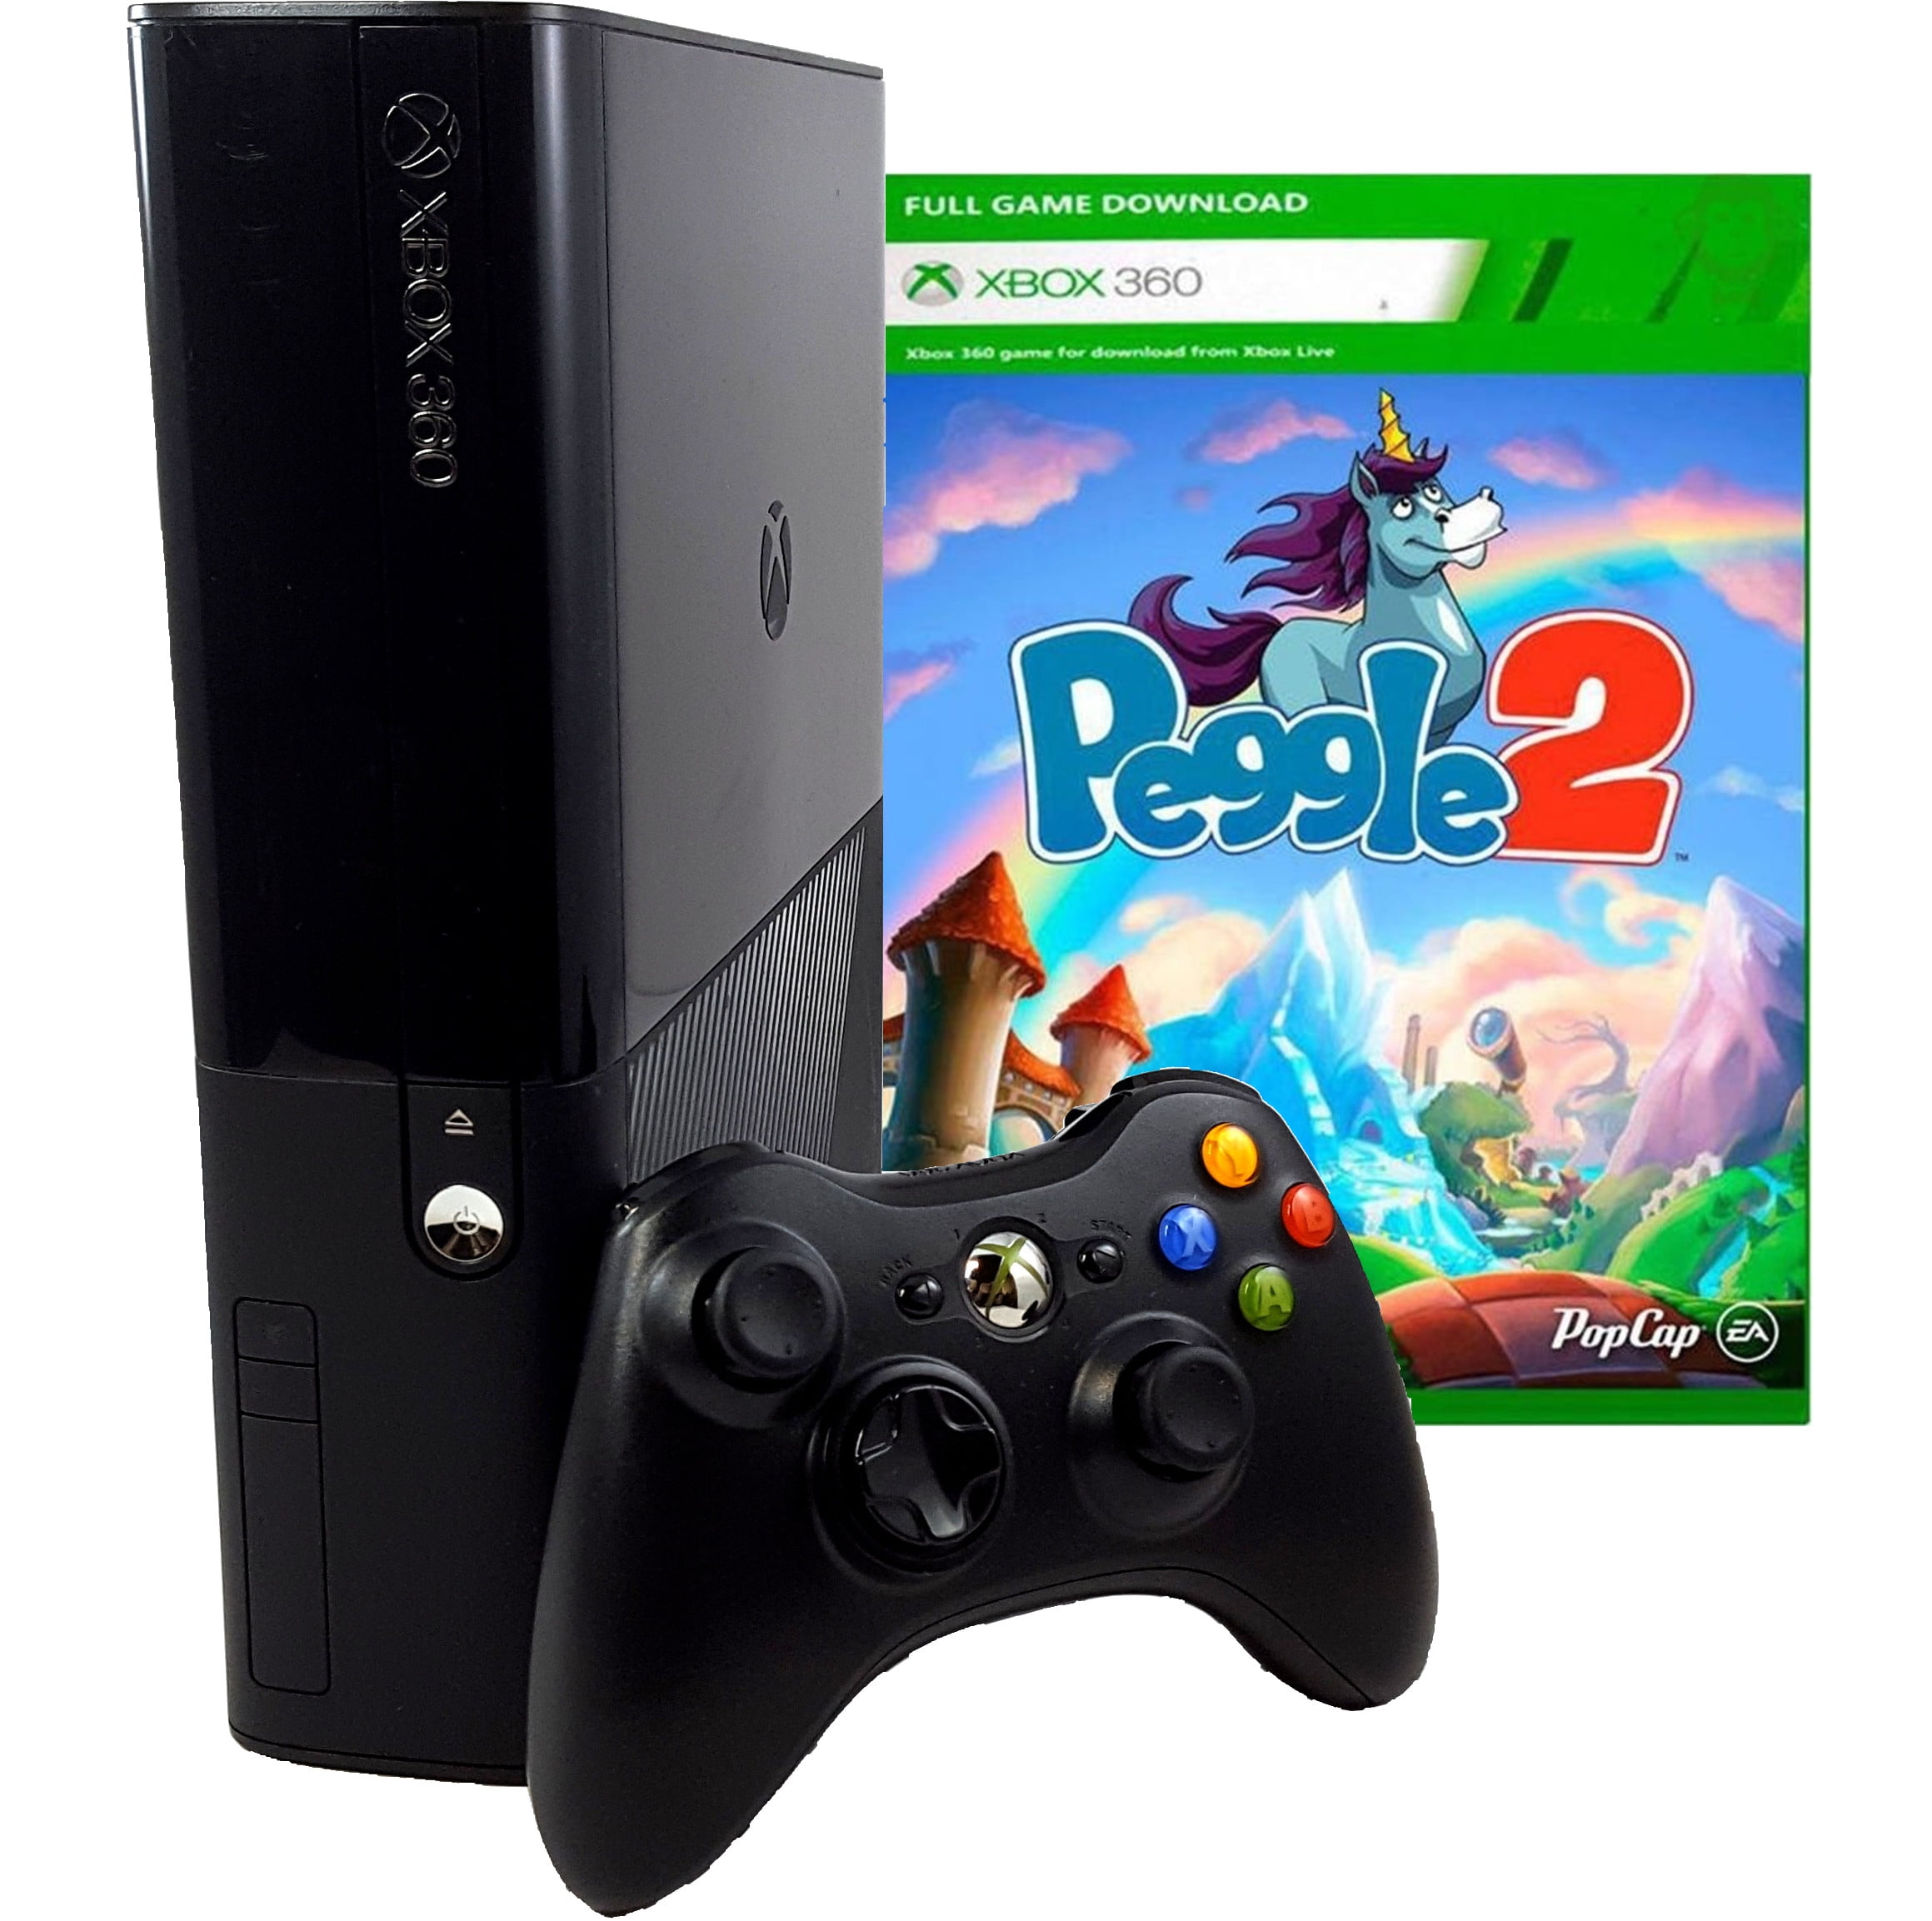 Refurbished Xbox 360 E 4gb Gaming Console With Peggle 2 Voucher And Controller Walmart Com Walmart Com - xbox 360 roblox cd